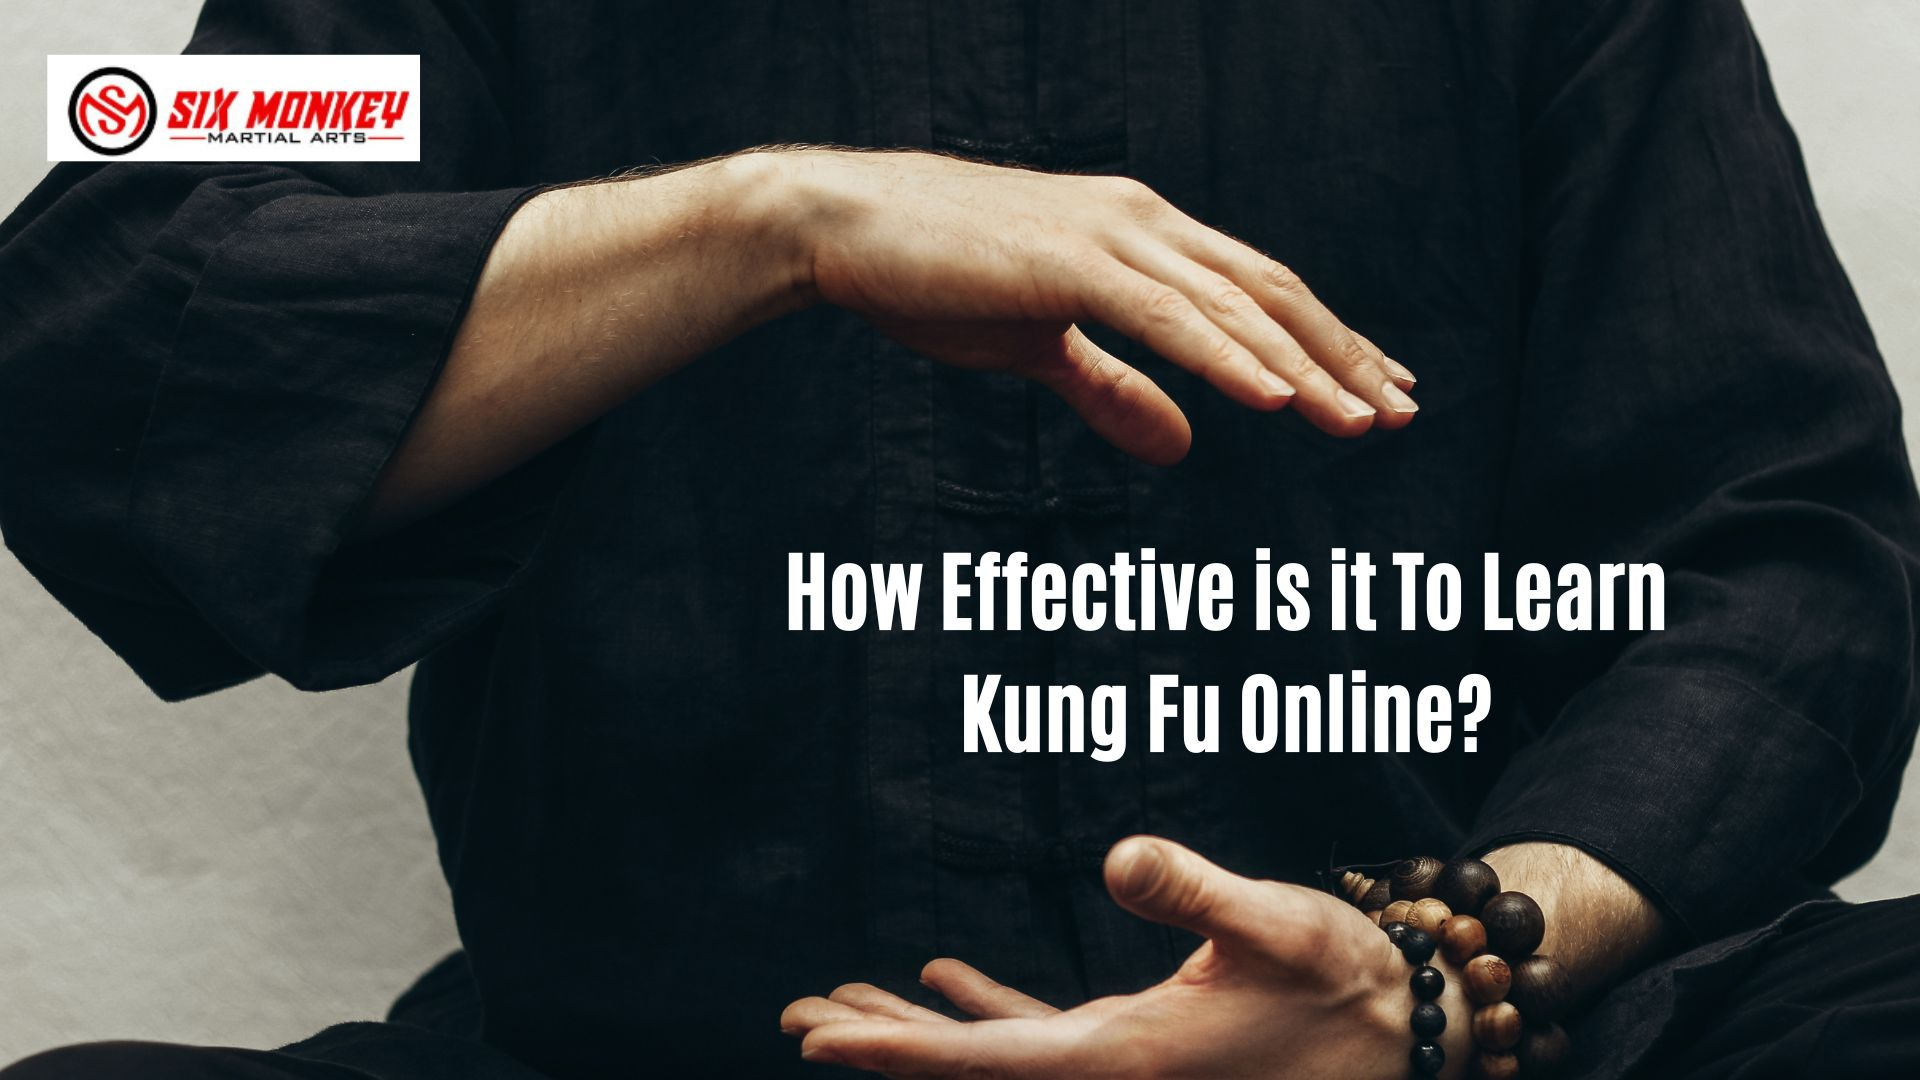 How Effective is it To Learn Kung Fu Online? shaolin kung fu training